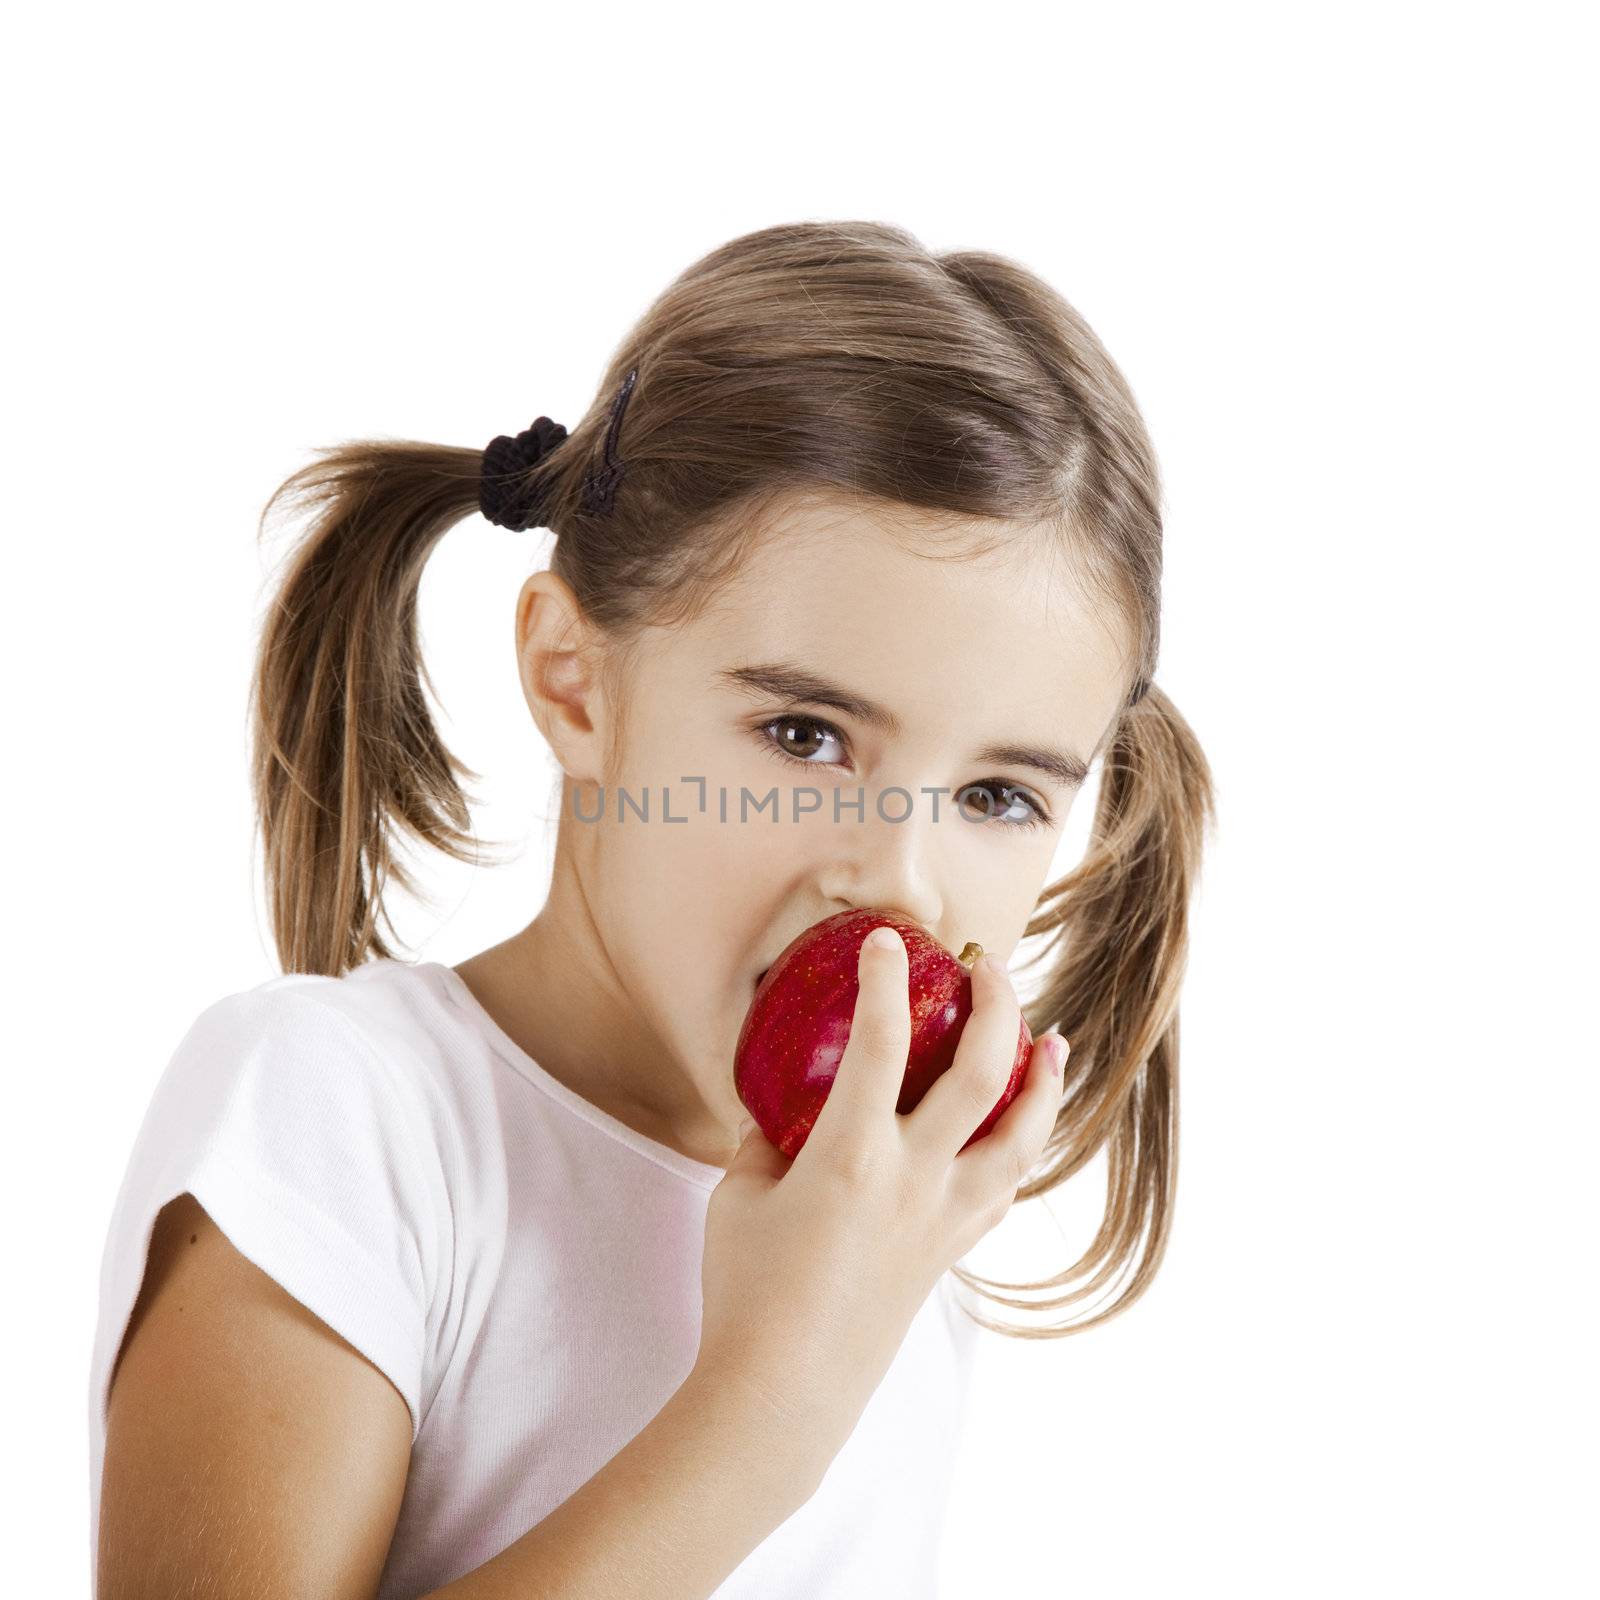 Eating an Apple by Iko